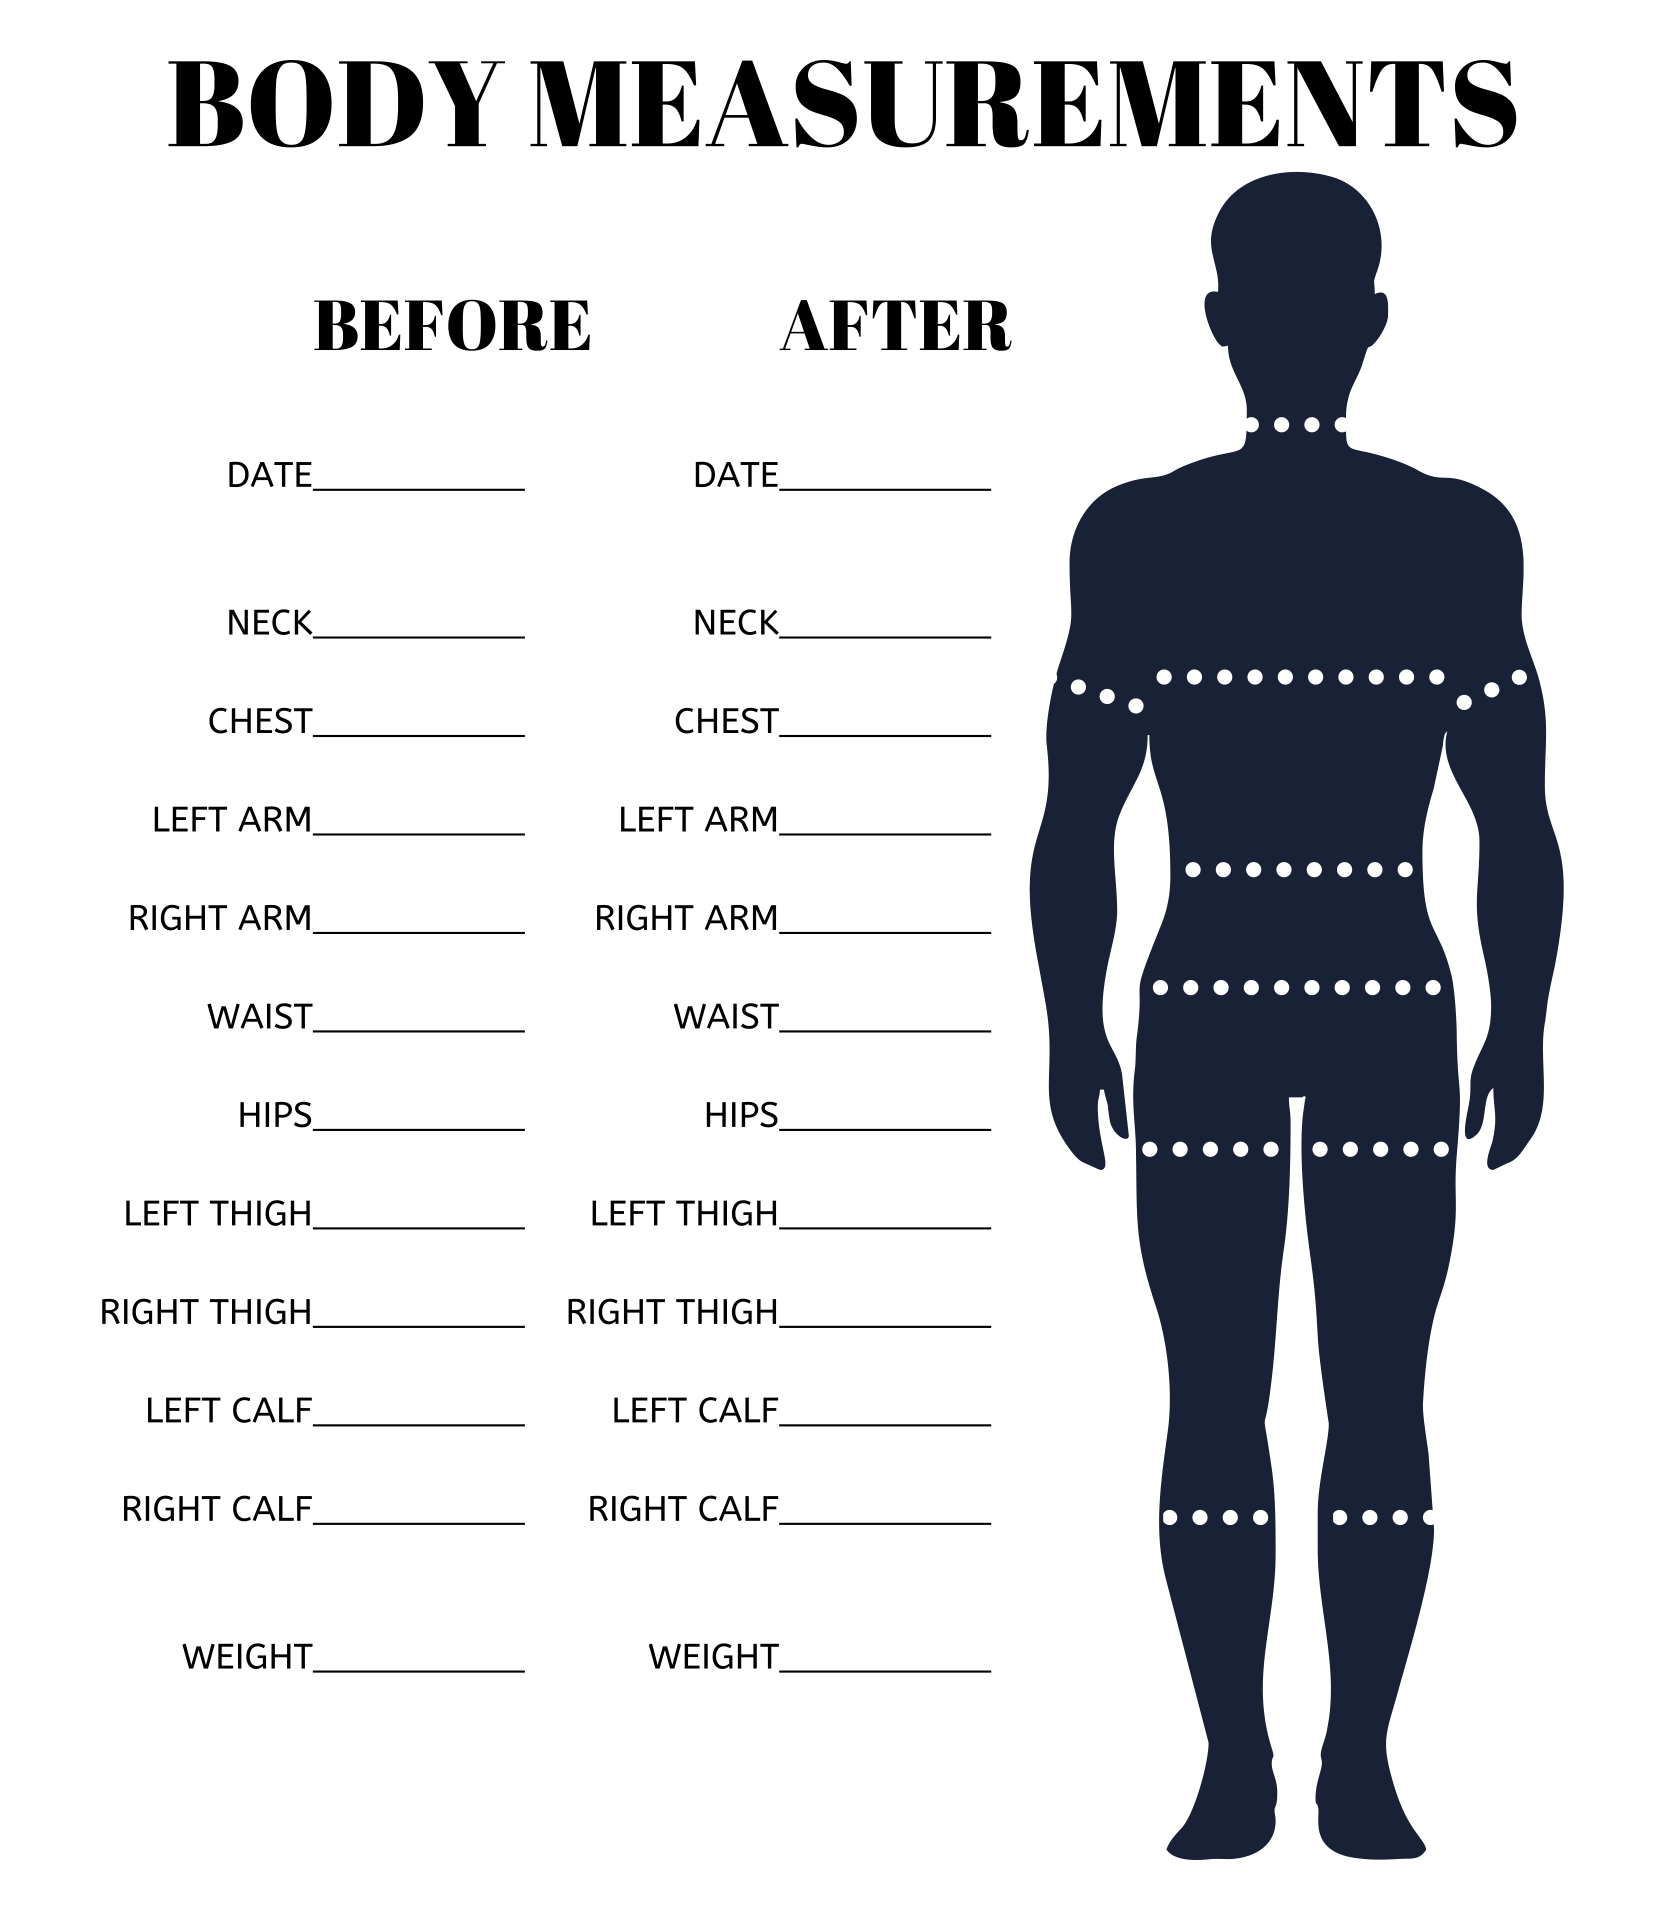 free-printable-body-measurement-chart-customize-and-print